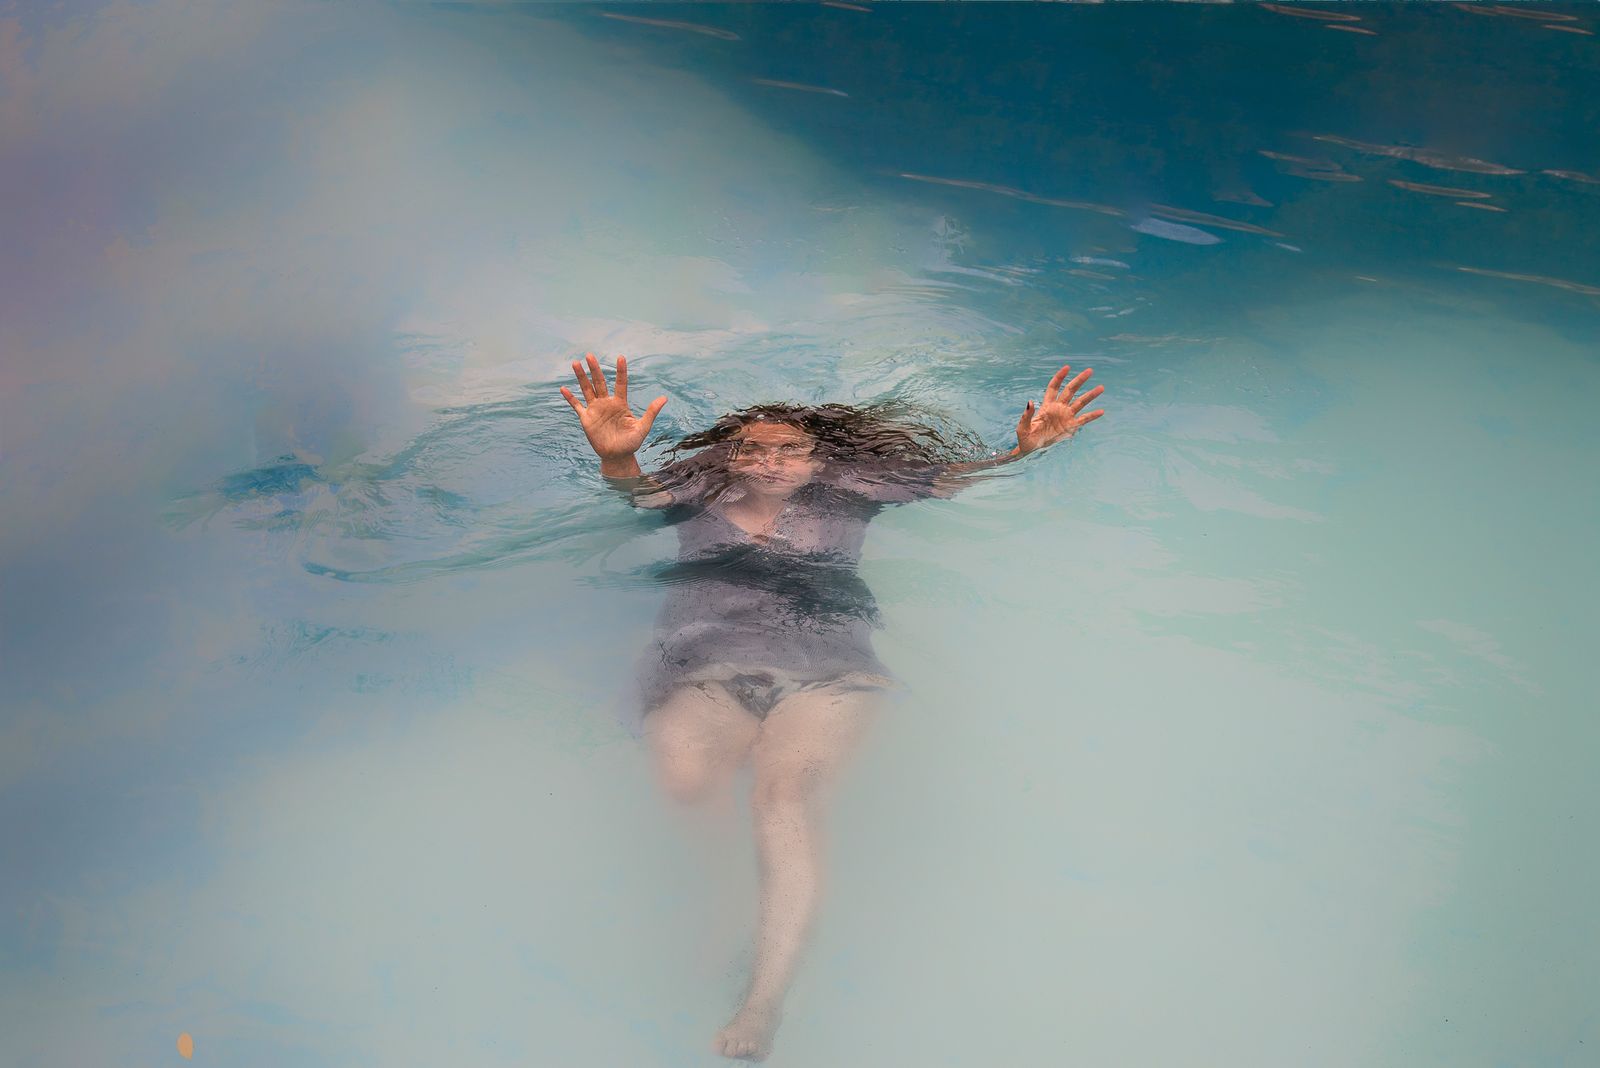 © Patricia Ackerman - Image from the The water dreams photography project